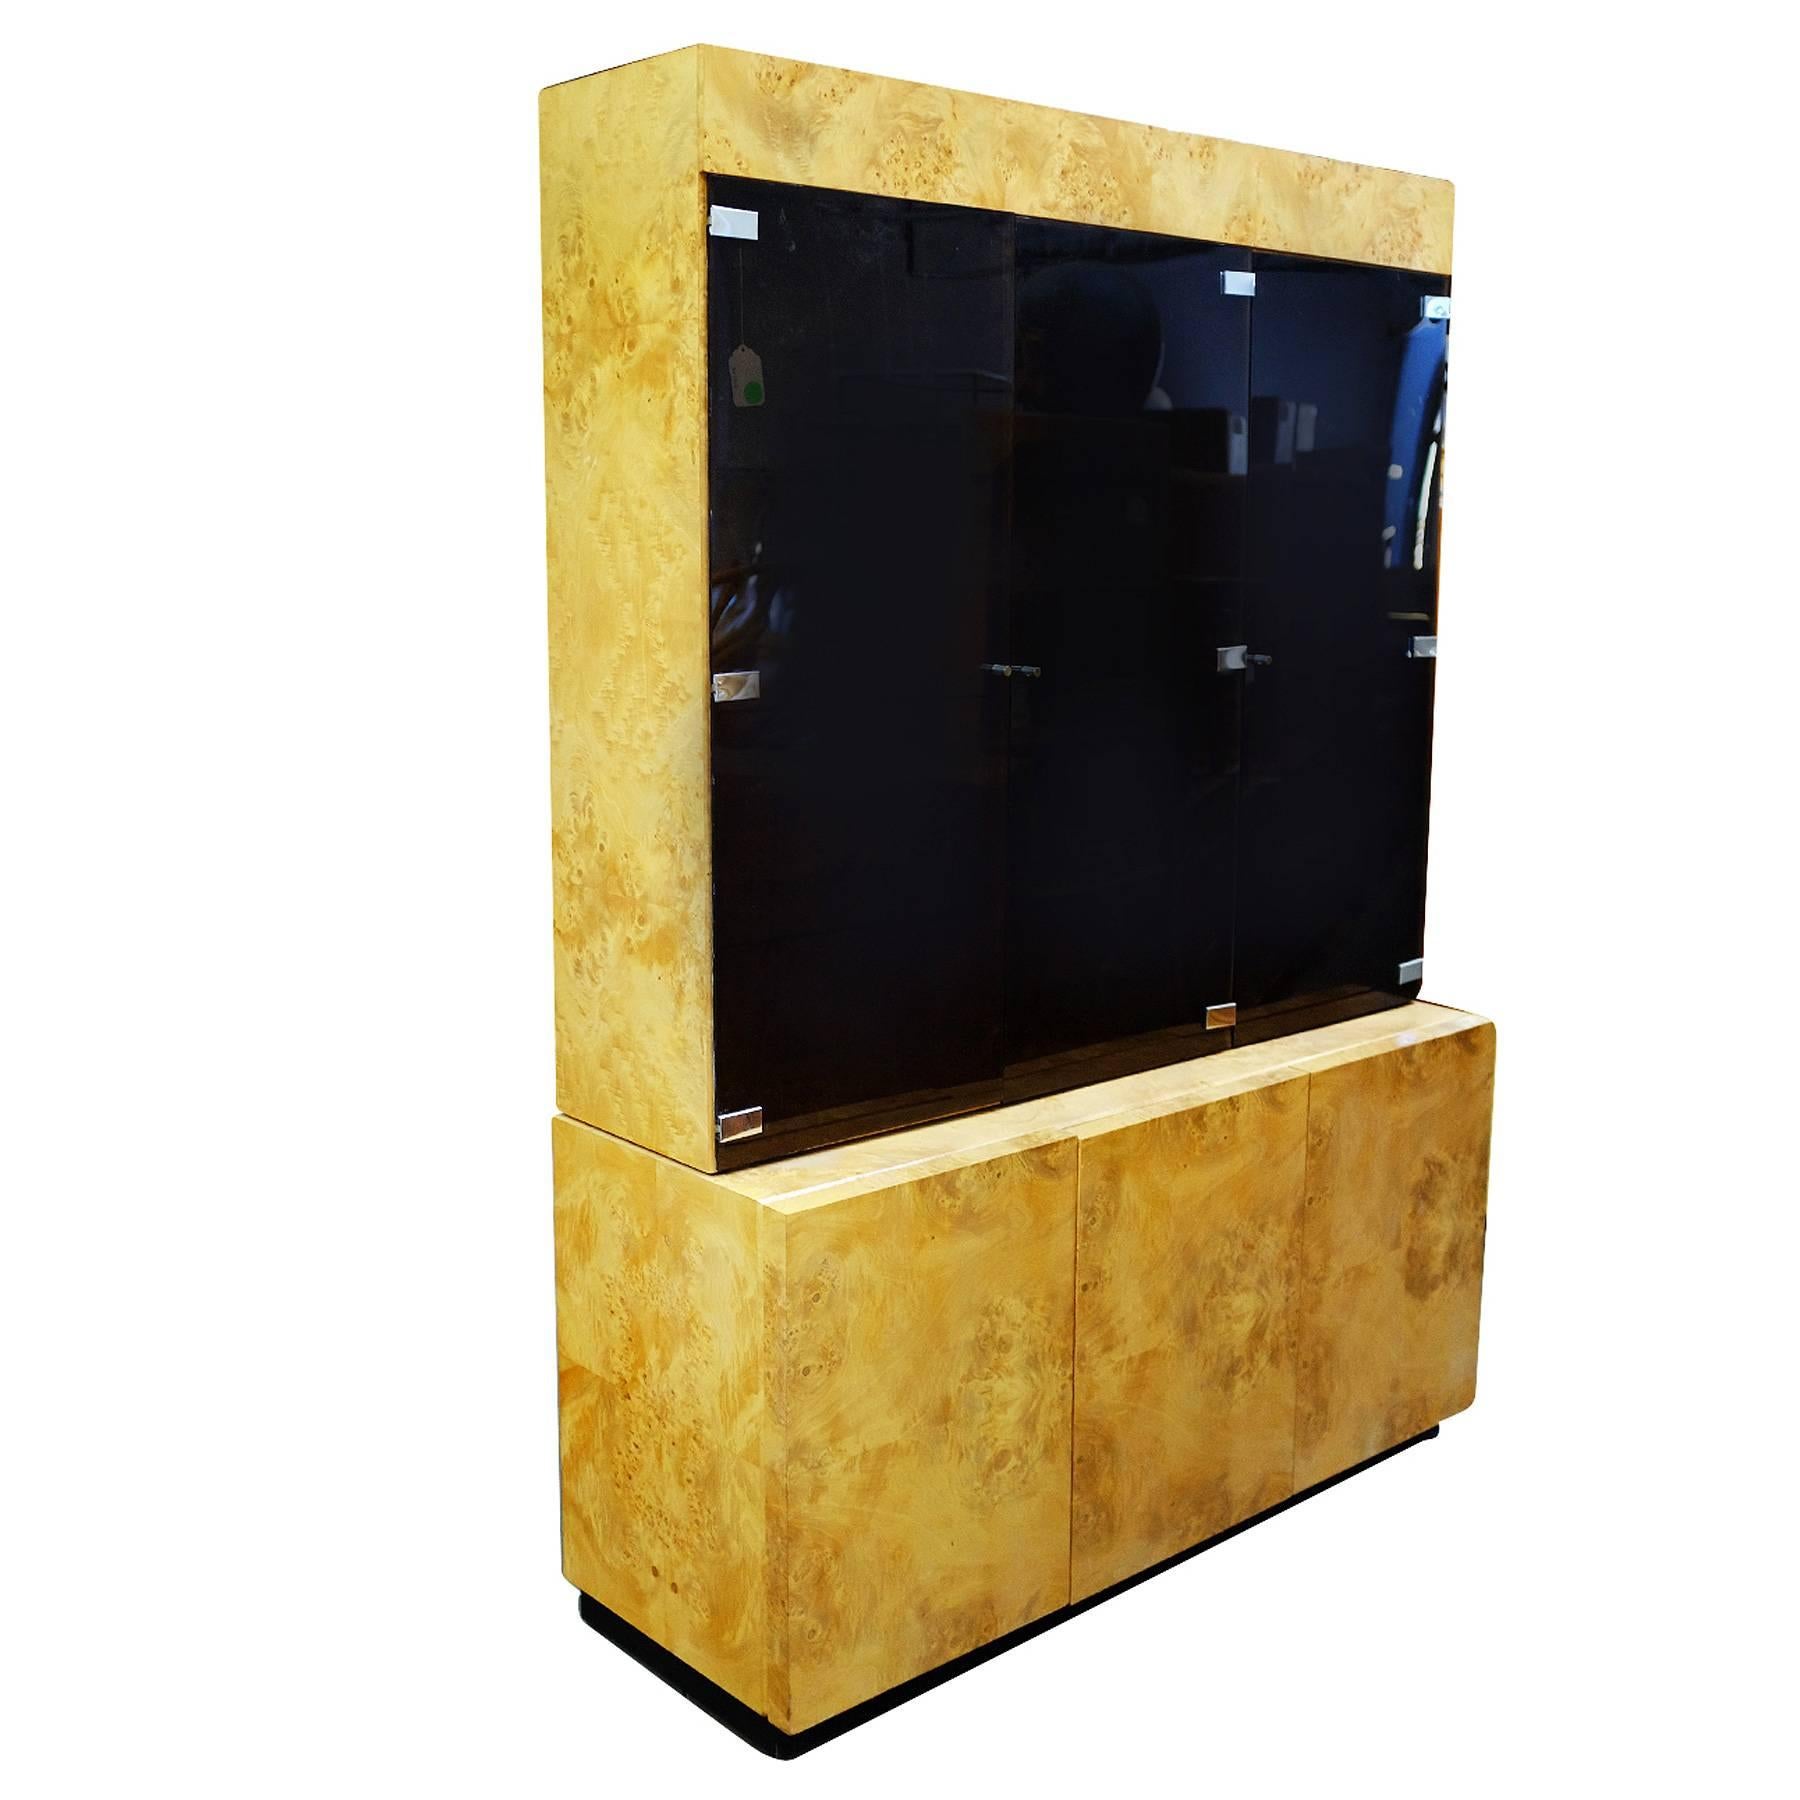 Large Postmodern burl elmwood cabinet featuring a breakfront with three smoked glass doors containing adjustable Glass shelves inside and three cabinets underneath. There are three recessed lights along the inside of each cabinet.

This cabinet was